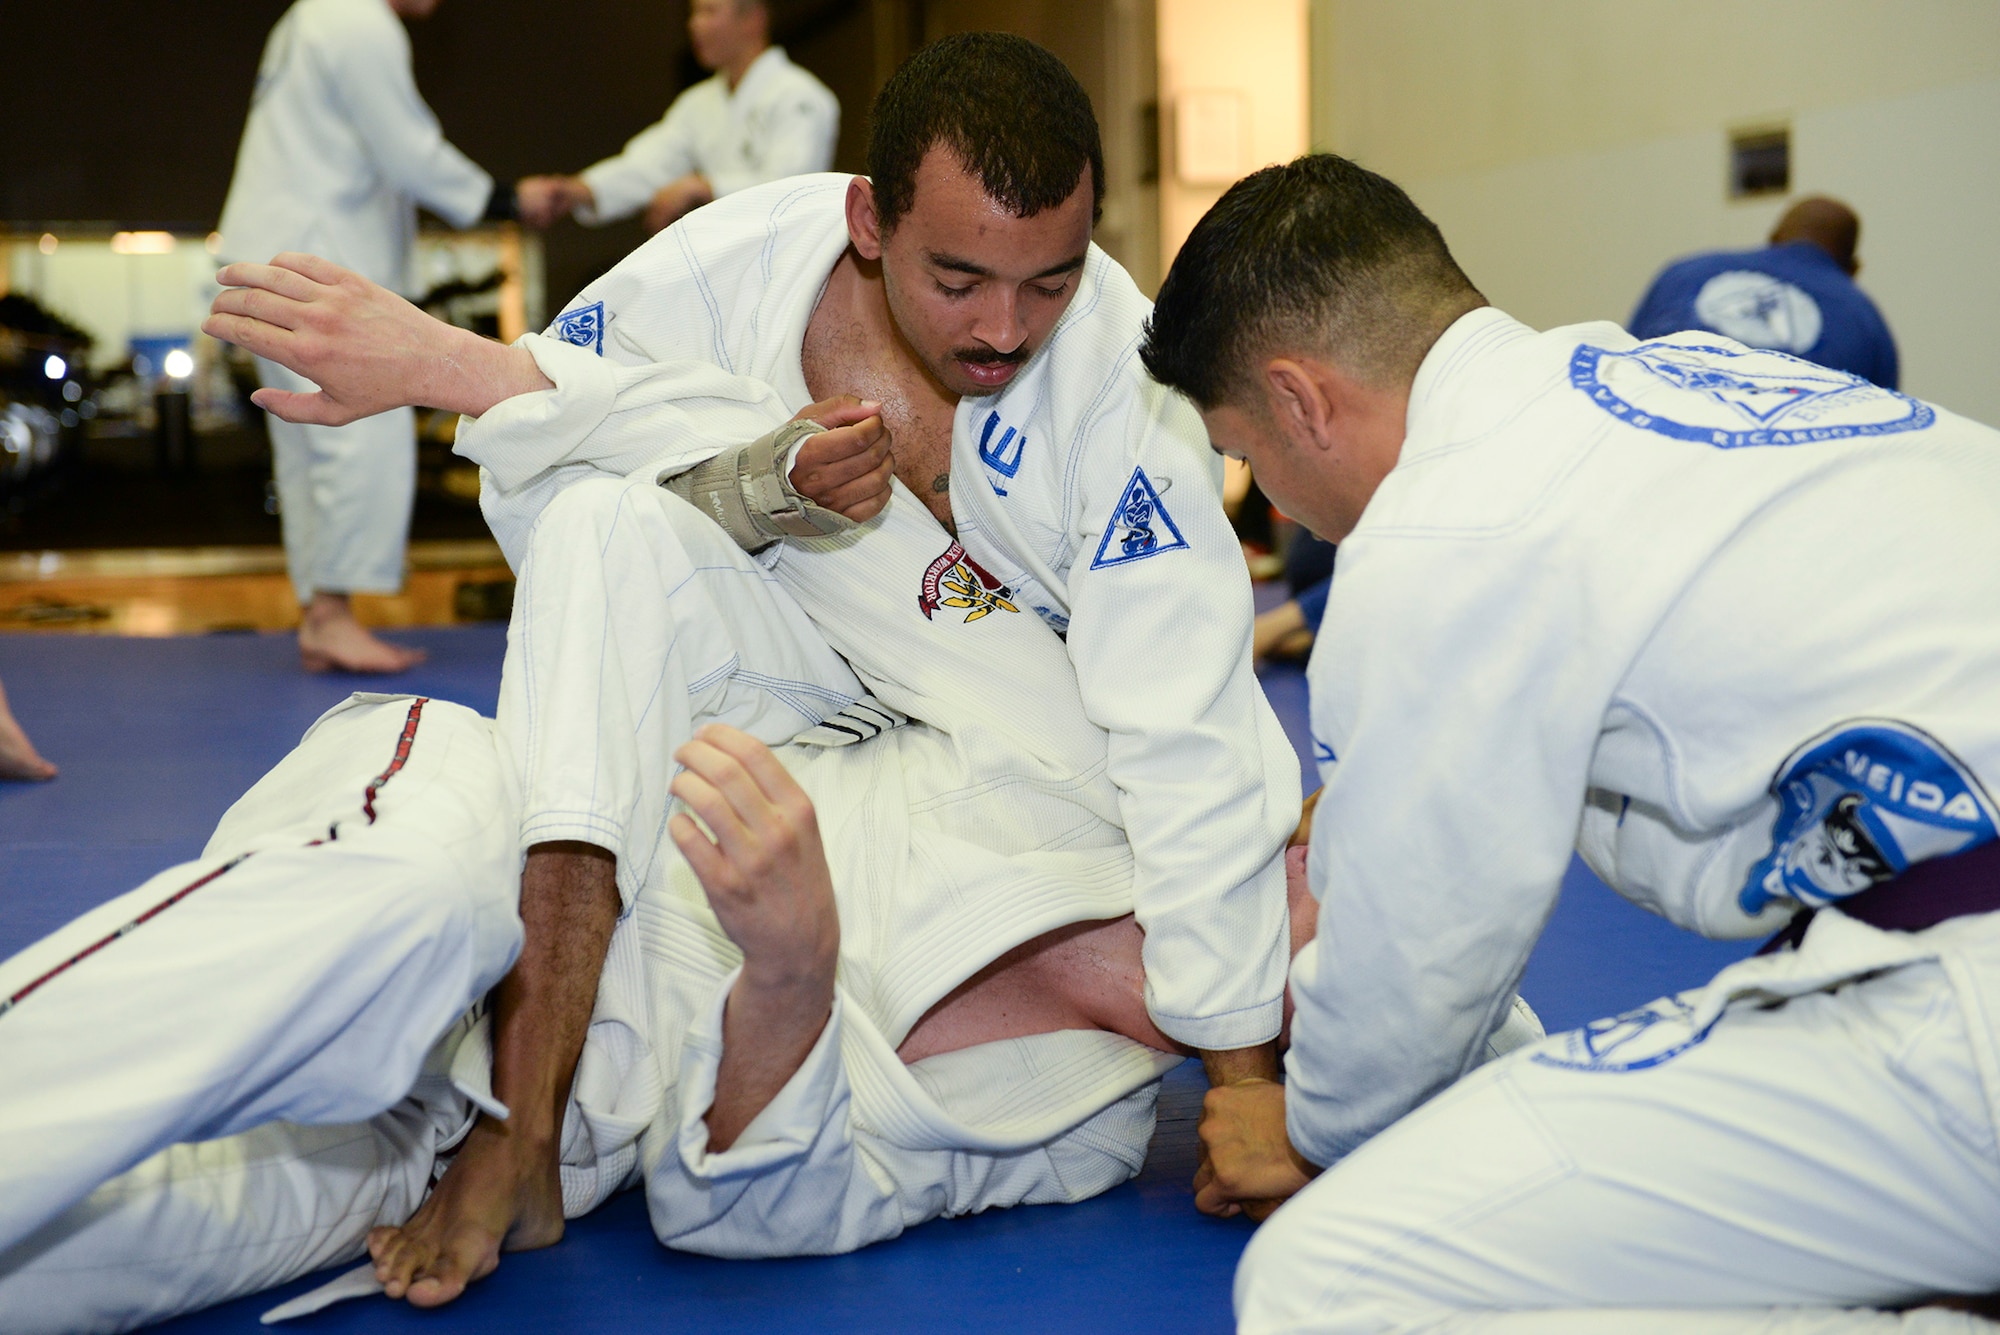 A student gives instructions to others at Endure, a jiu-jitsu class at Yokota Air Base, Japan, June 10, 2015. After warming up, students paired off and took turns practicing various maneuvers. (U.S. Air Force photos by Airman 1st Class Elizabeth Baker/Released)